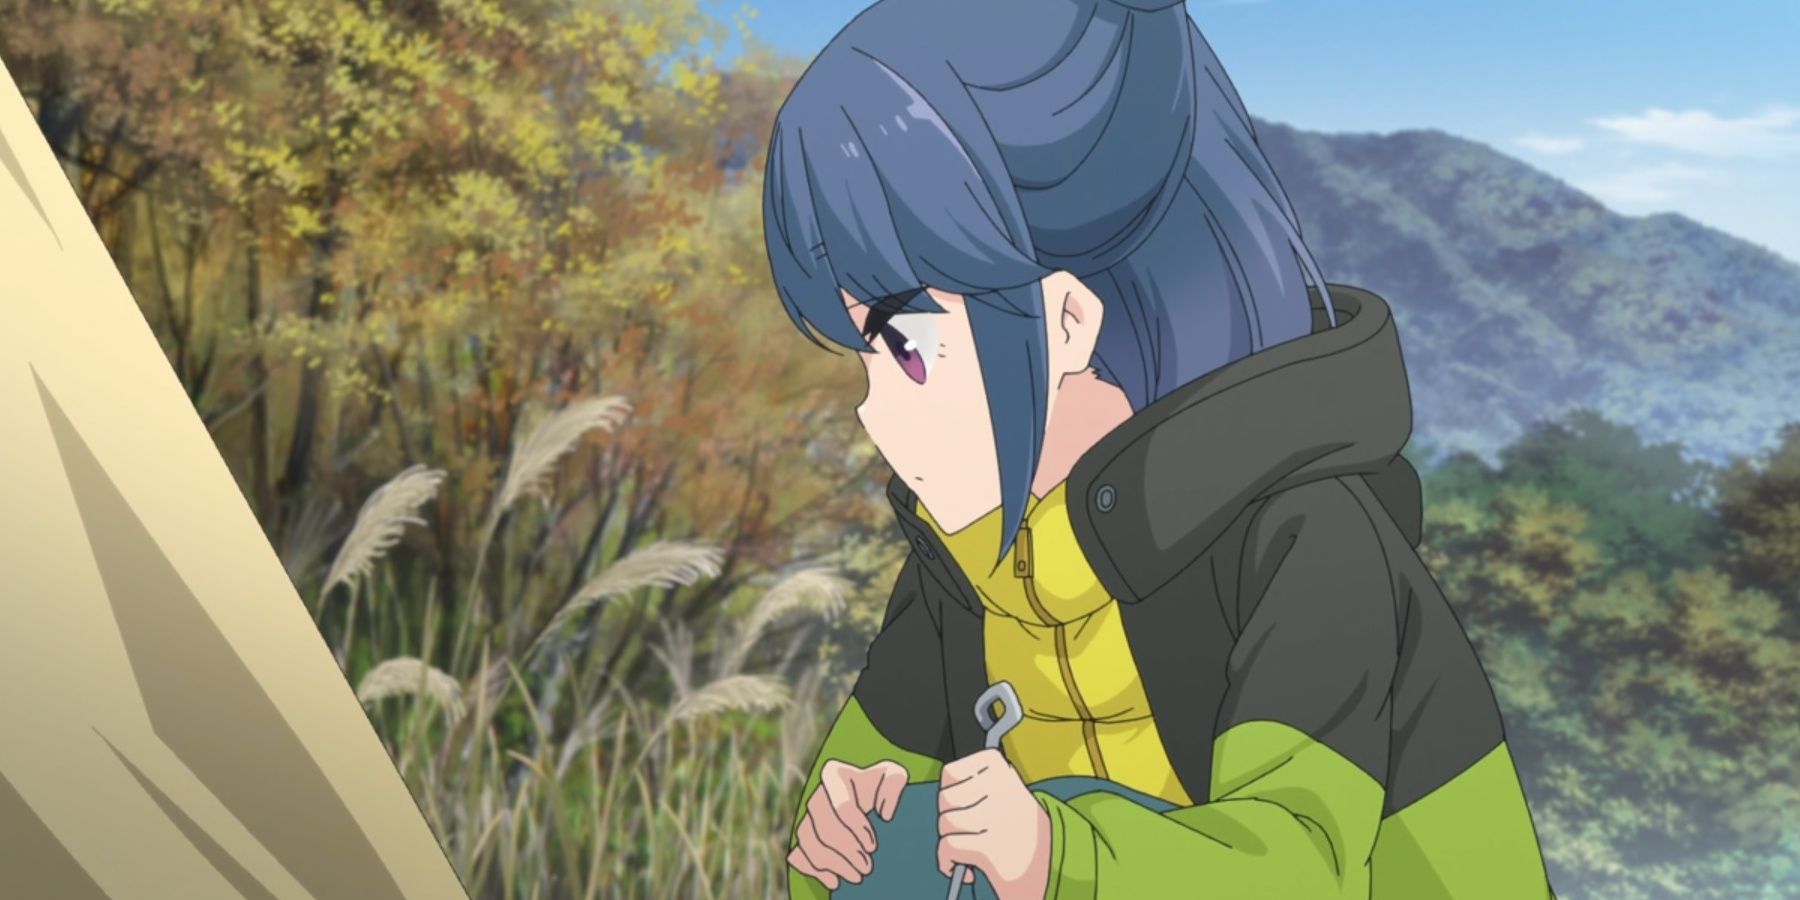 rin camping 2 laid back camp